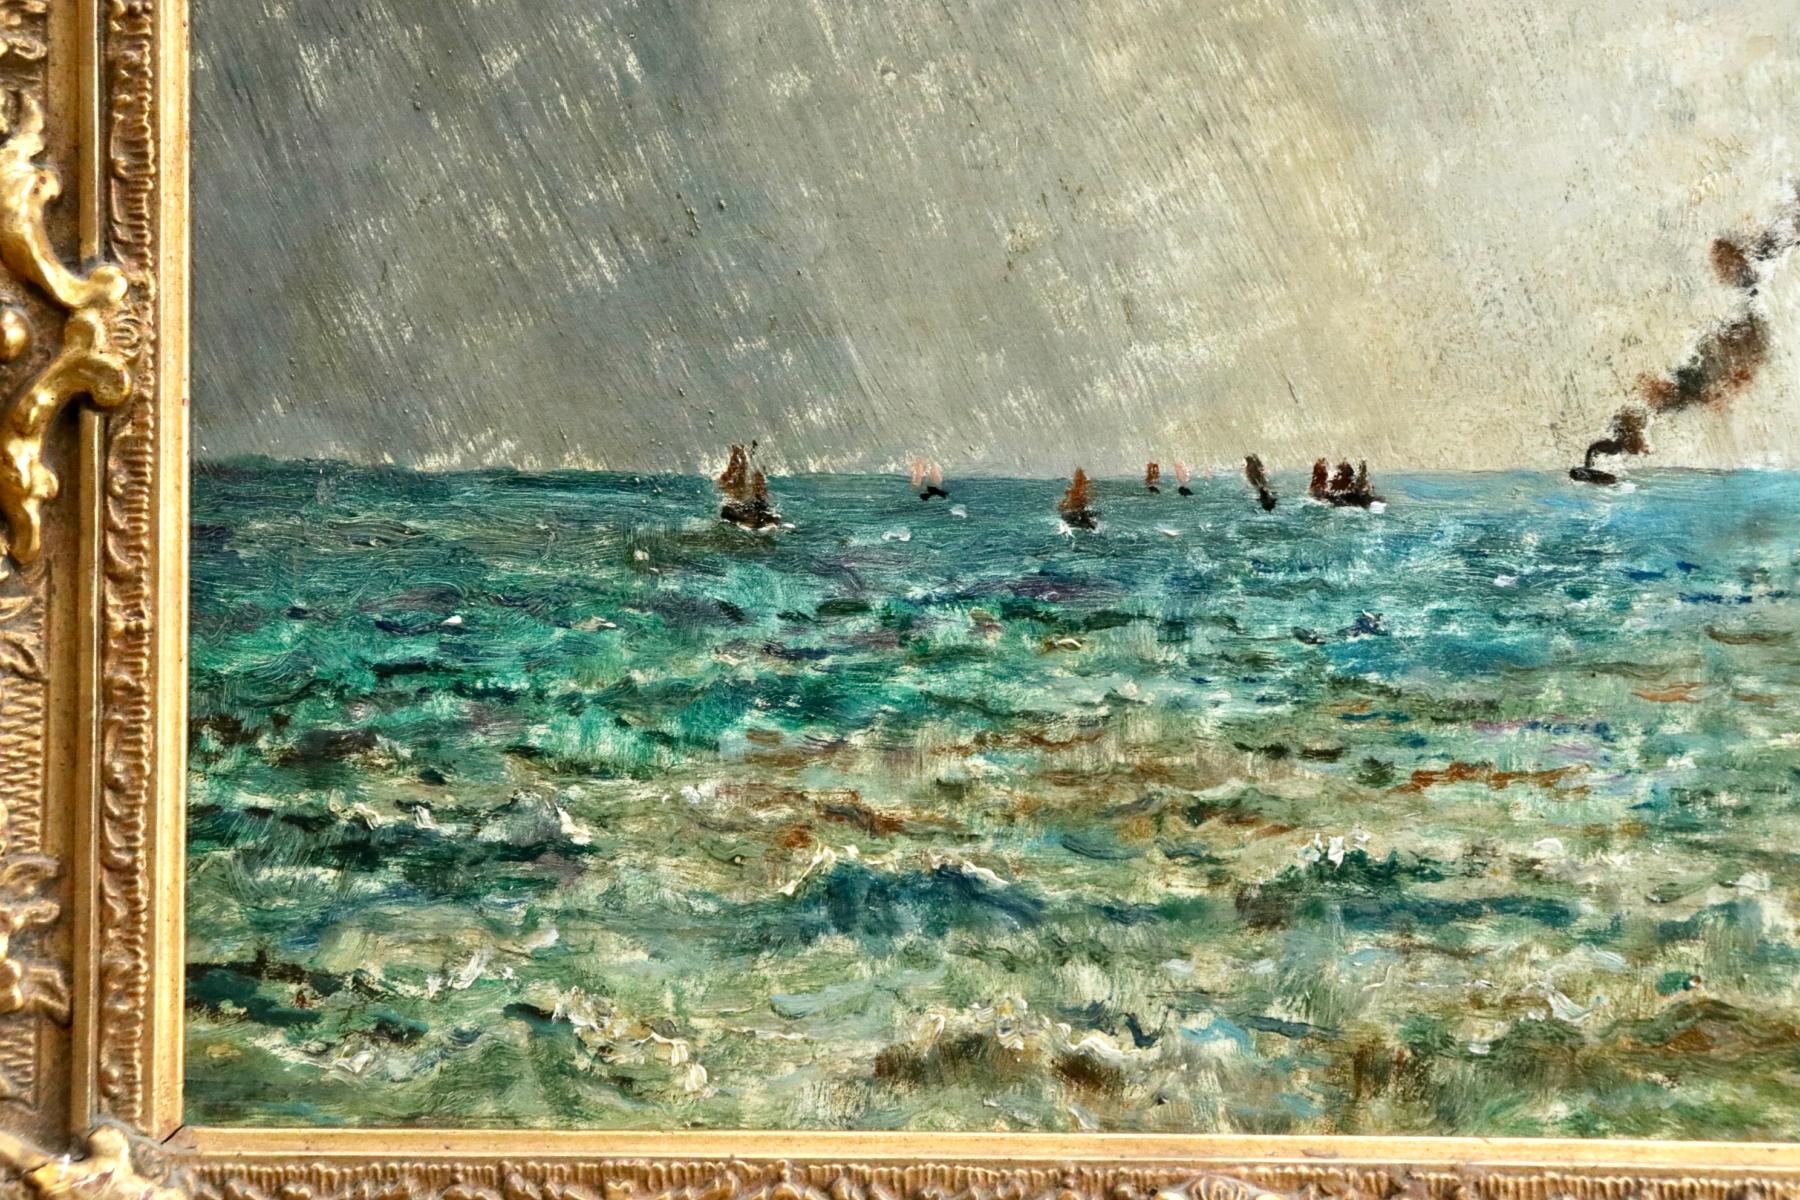 Steamers off the Coast - 19th Century Oil, Boats in Seascape by Alfred Stevens - Brown Landscape Painting by Alfred Émile Léopold Stevens